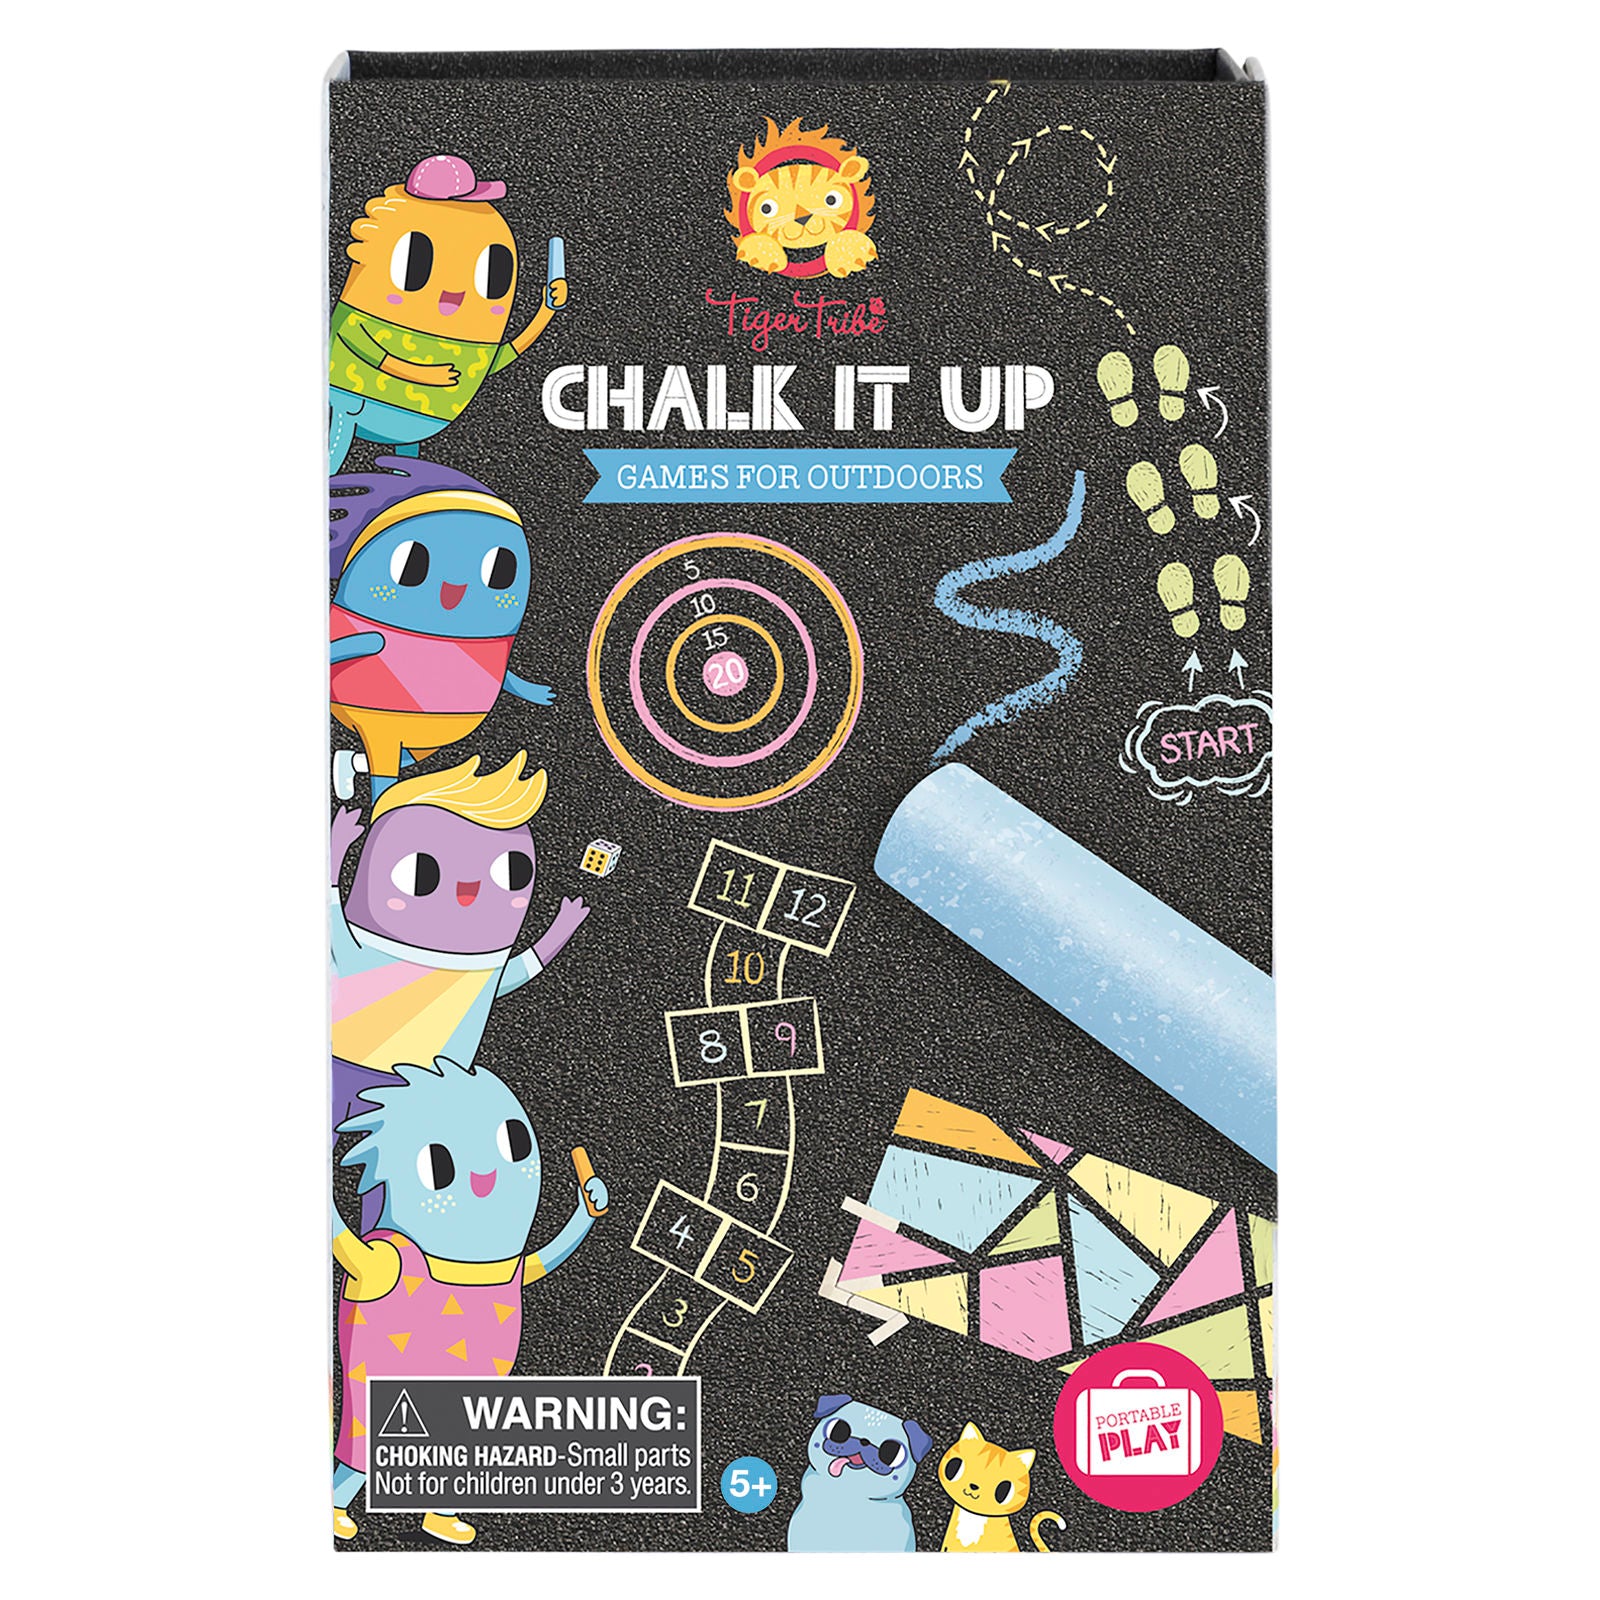 Tiger Tribe Games For Outdoors – Chalk It Up